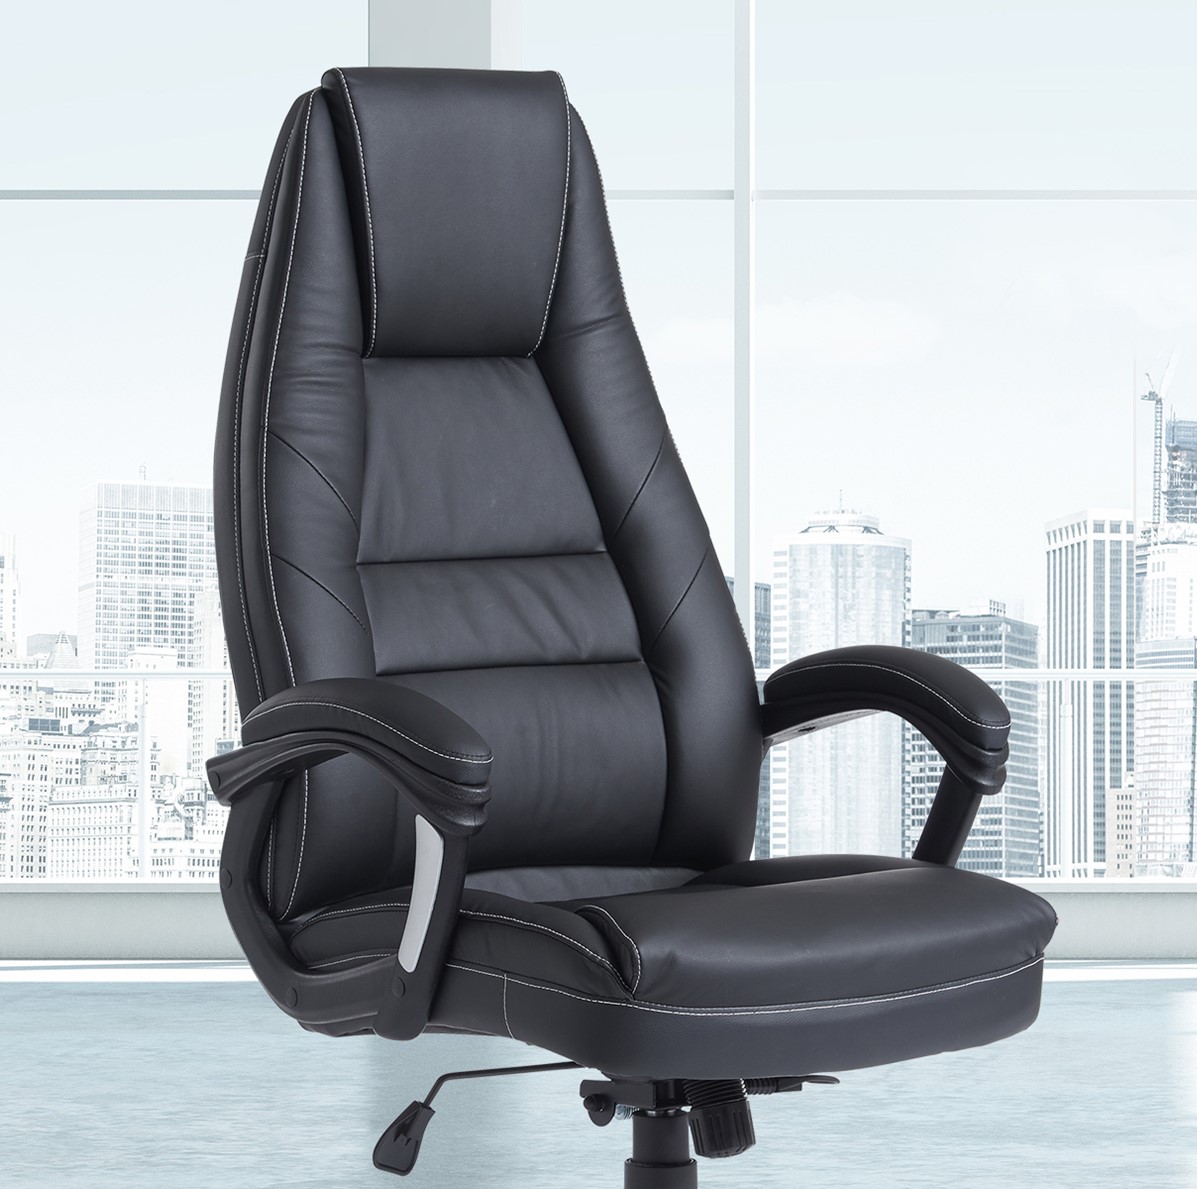 Leather Executive Office Chairs High, Executive High Back Leather Office Chair